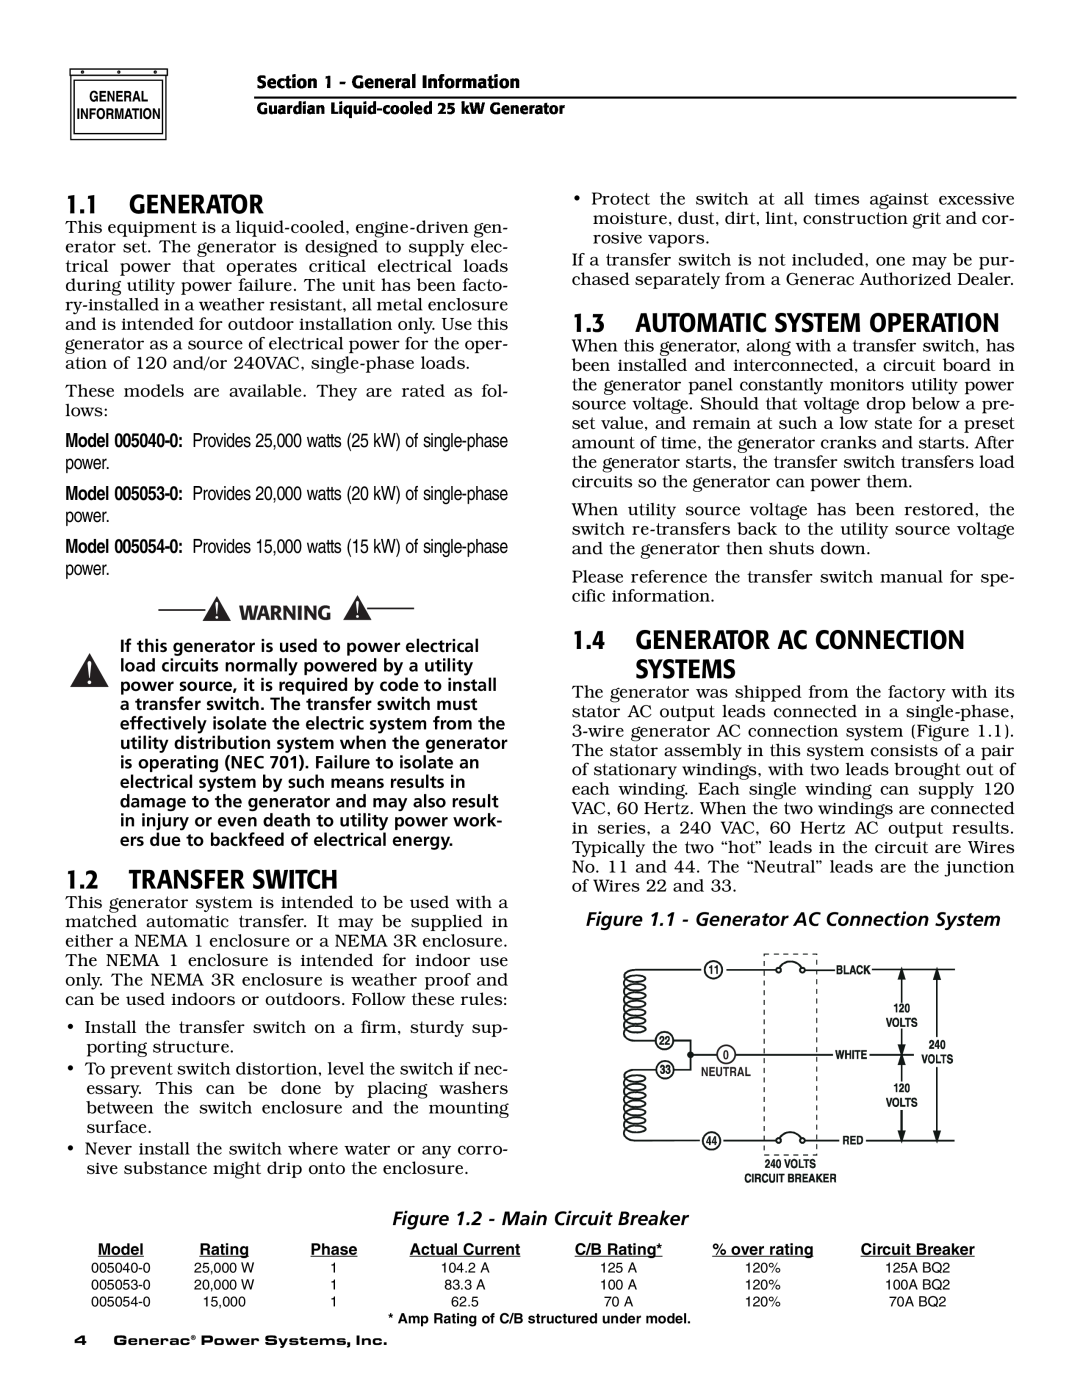 Generac Power Systems 005053-1, 005054-0 Automatic System Operation, Transfer Switch, Generator Ac Connection Systems 